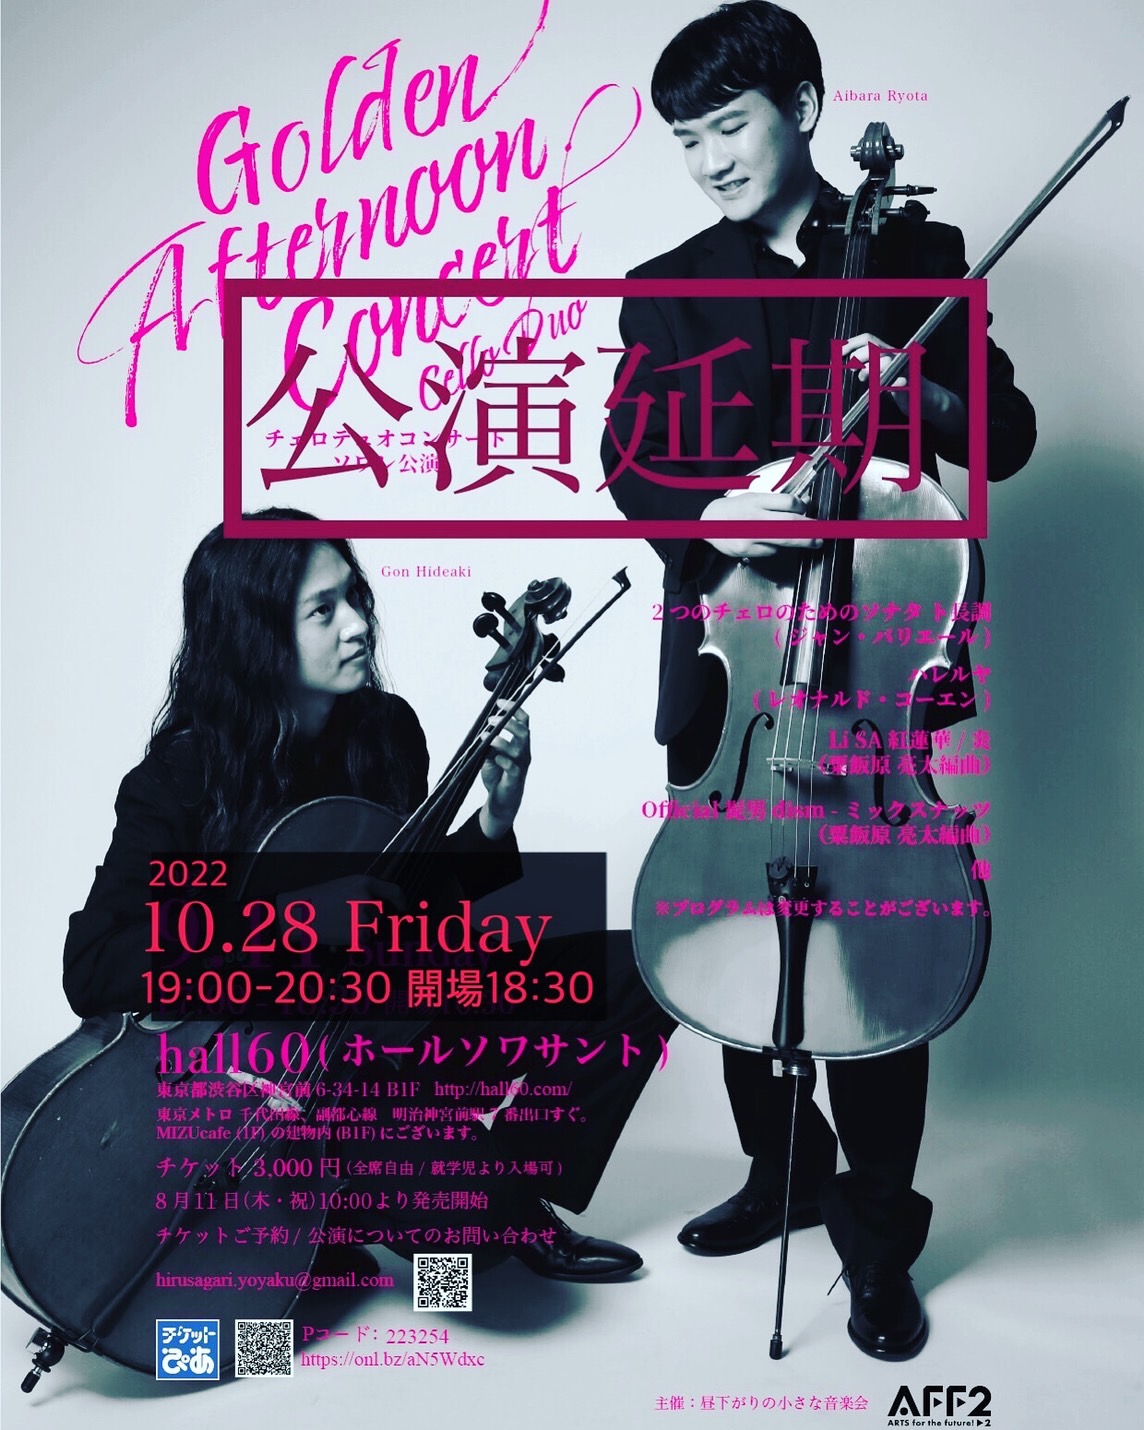 Golden Afternoon Concert Cello Duo